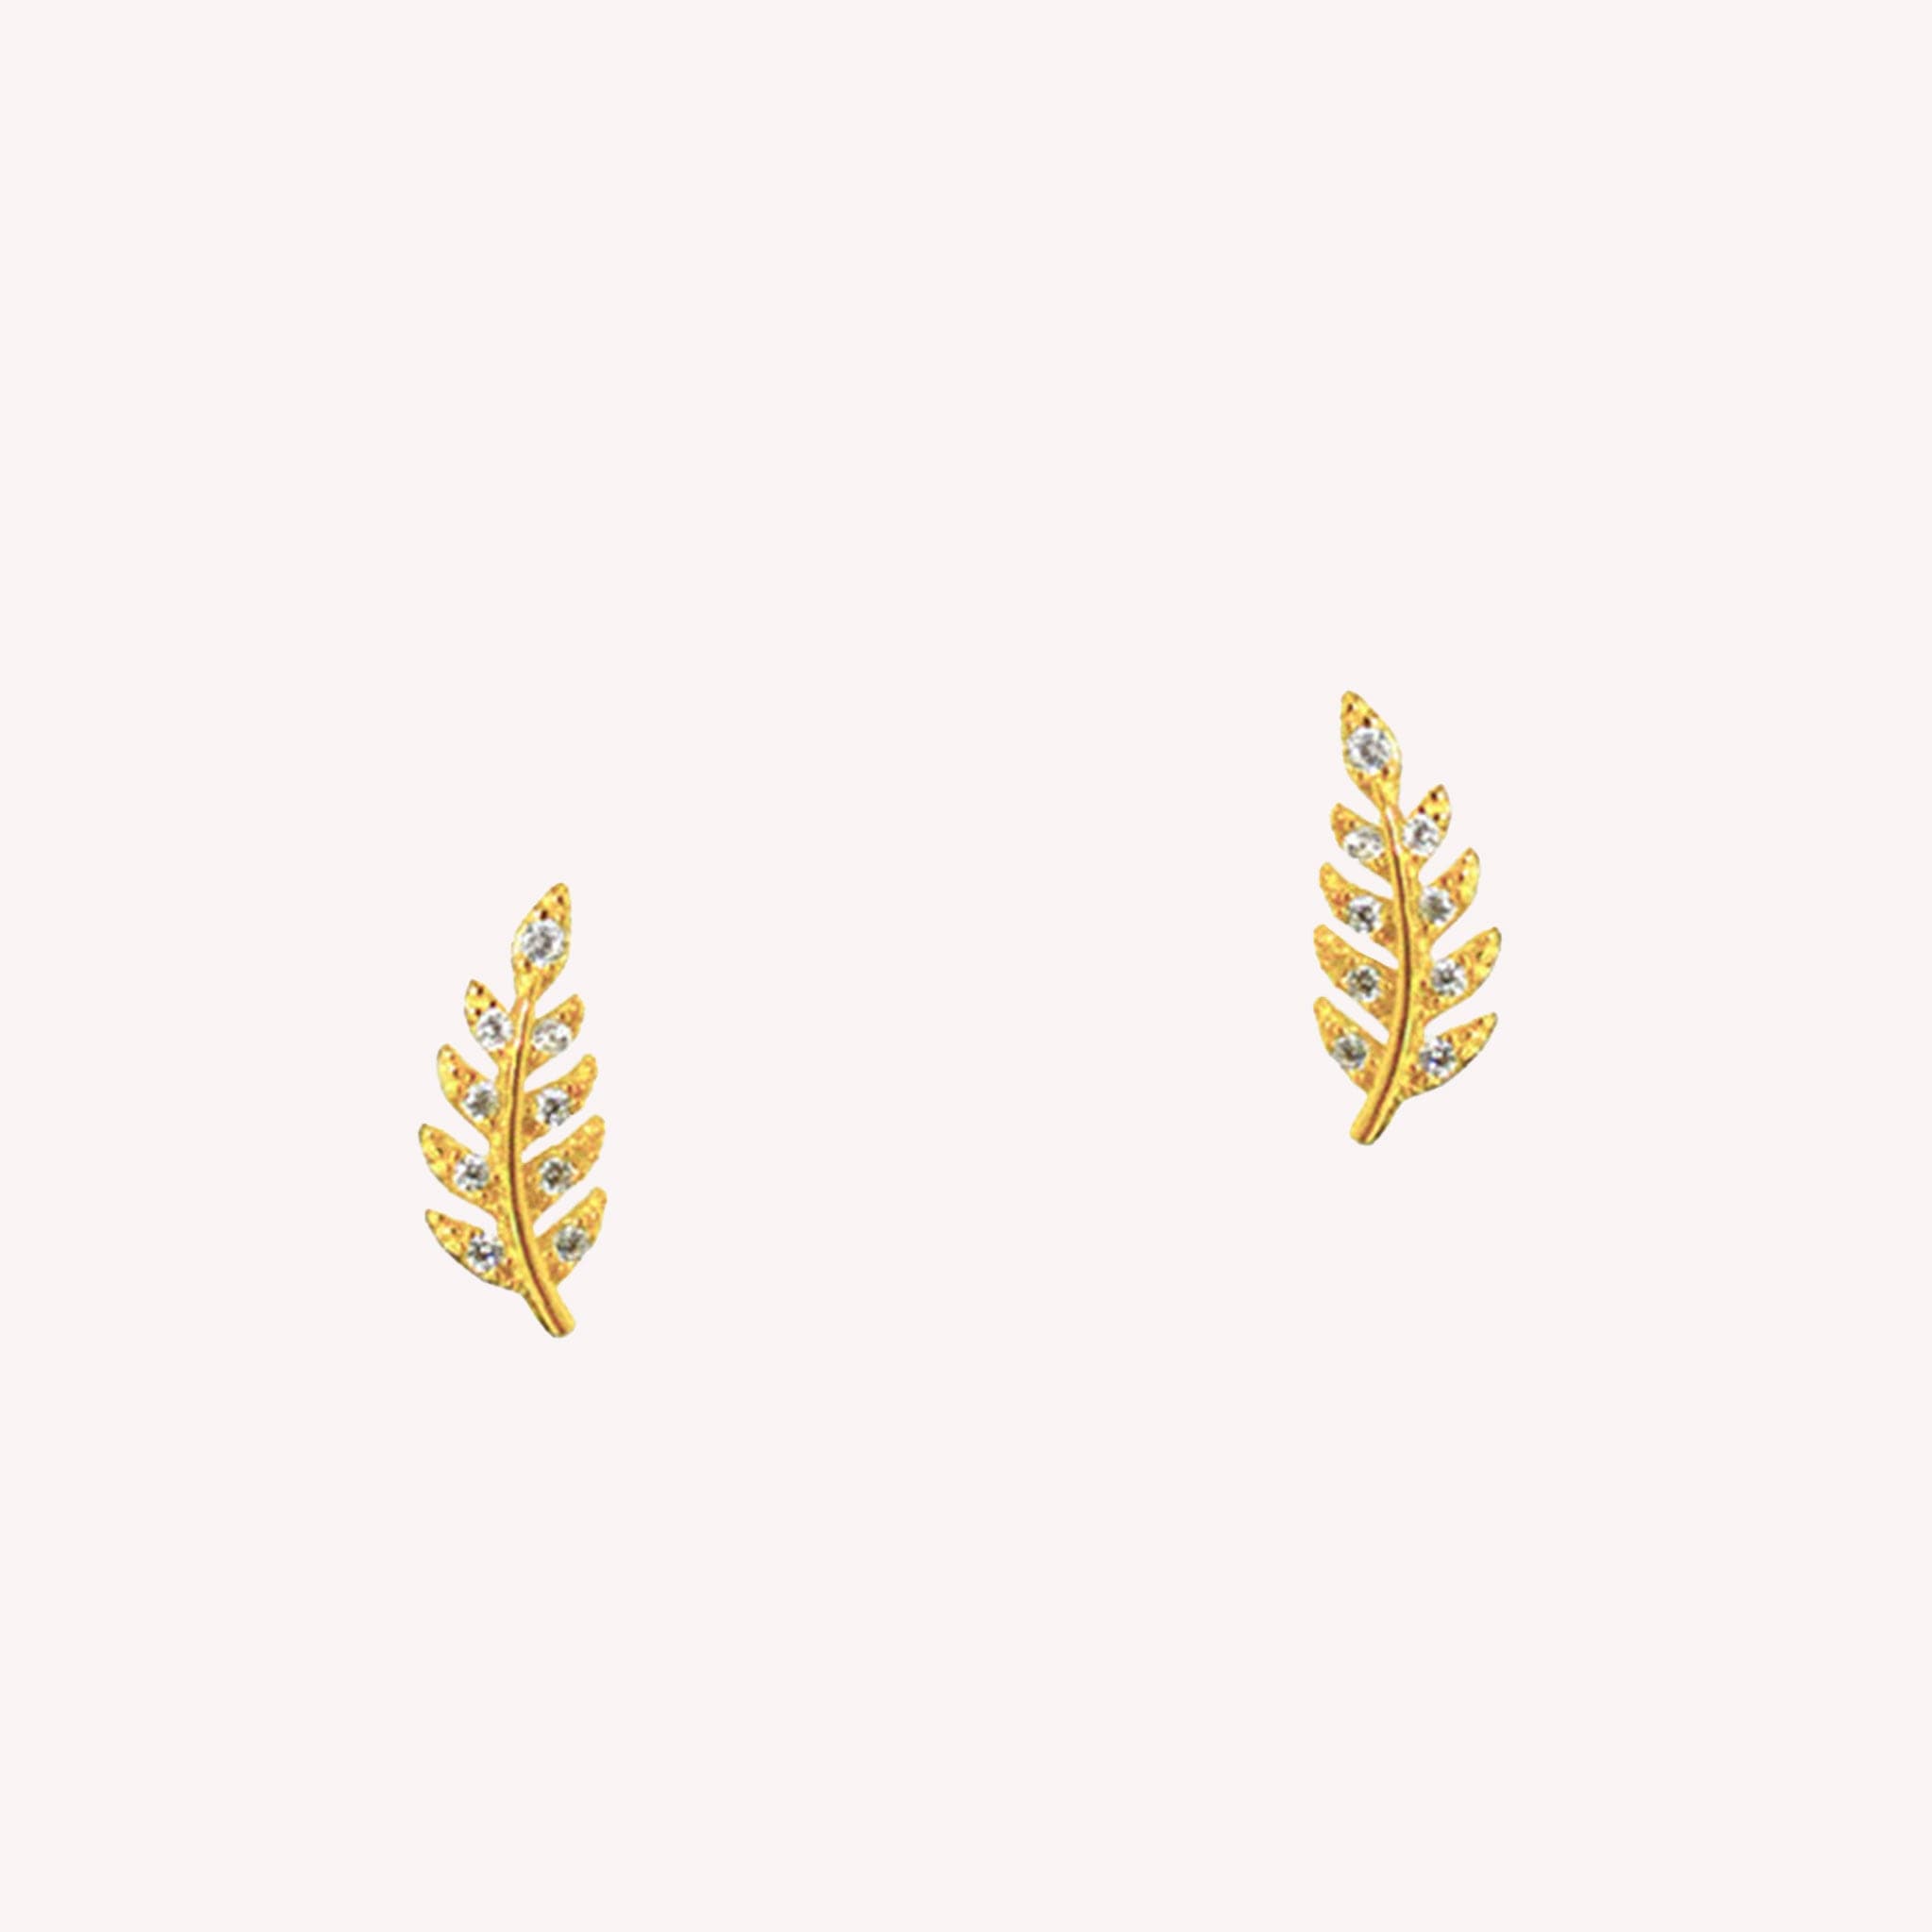 Gold leaf shaped earrings with a straight post backing and tiny cubic zirconias on each point of the leaf shape.